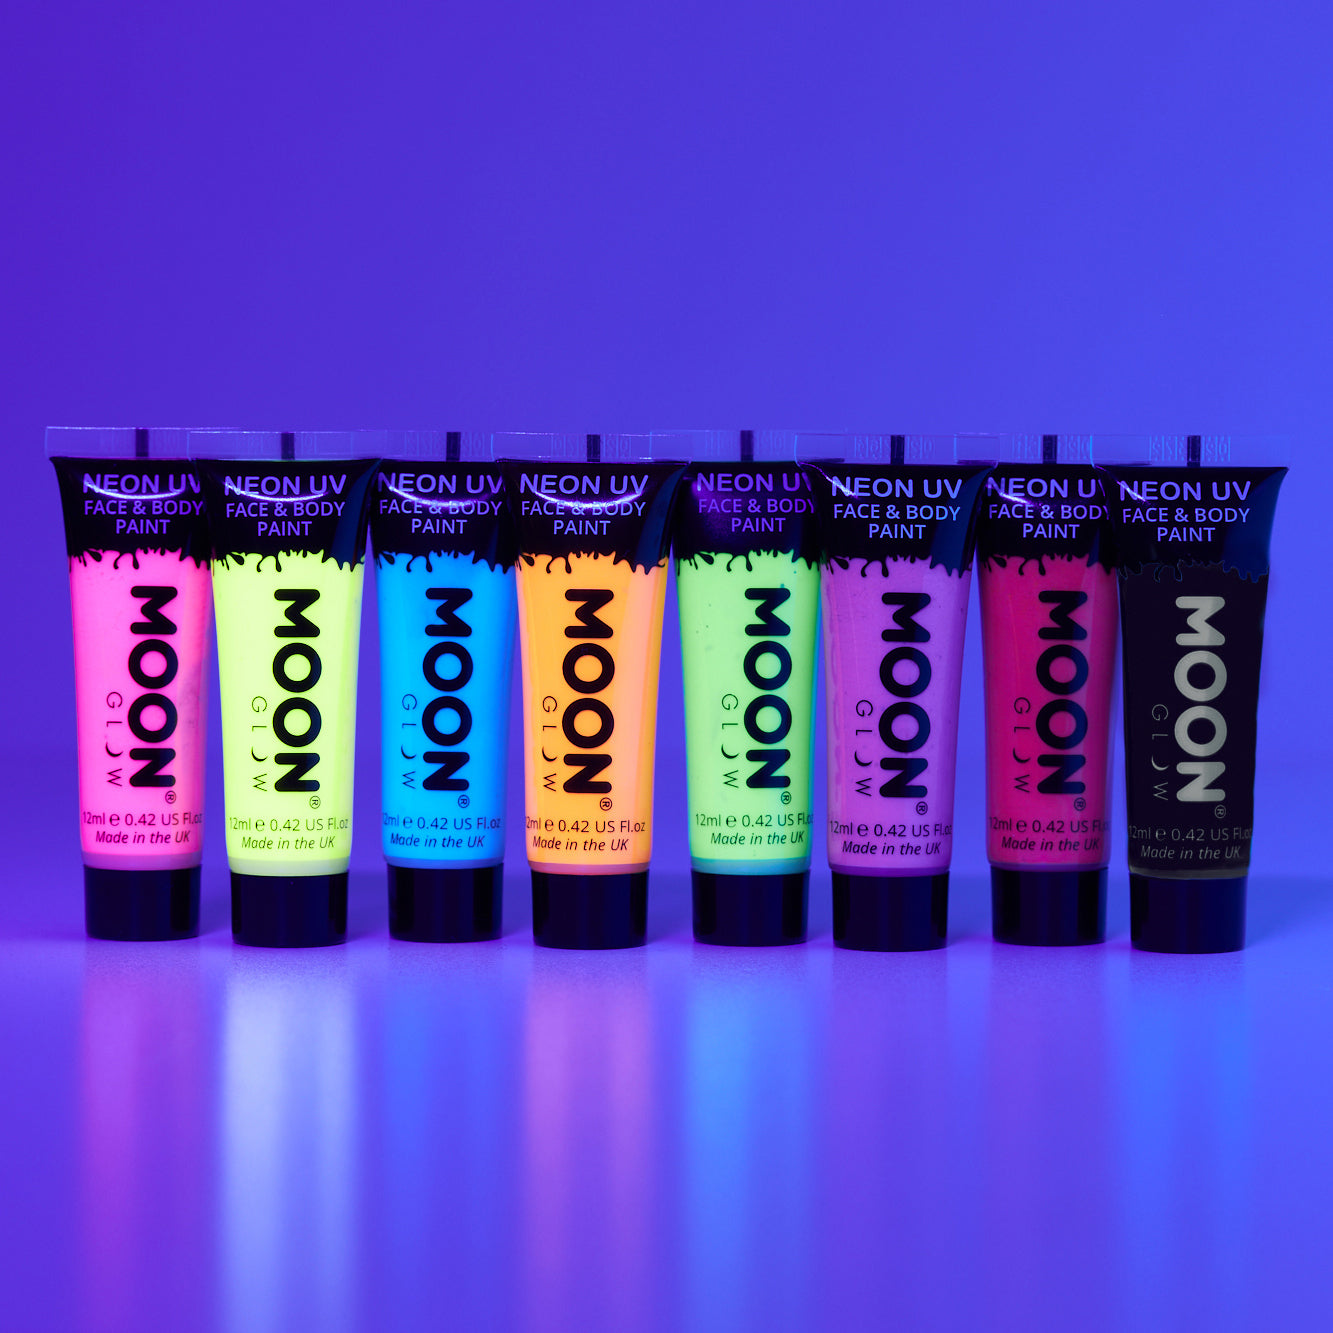 Neon UV Glow Blacklight Face & Body Paint Makeup. Cosmetically certified, FDA & Health Canada compliant, cruelty free and vegan.